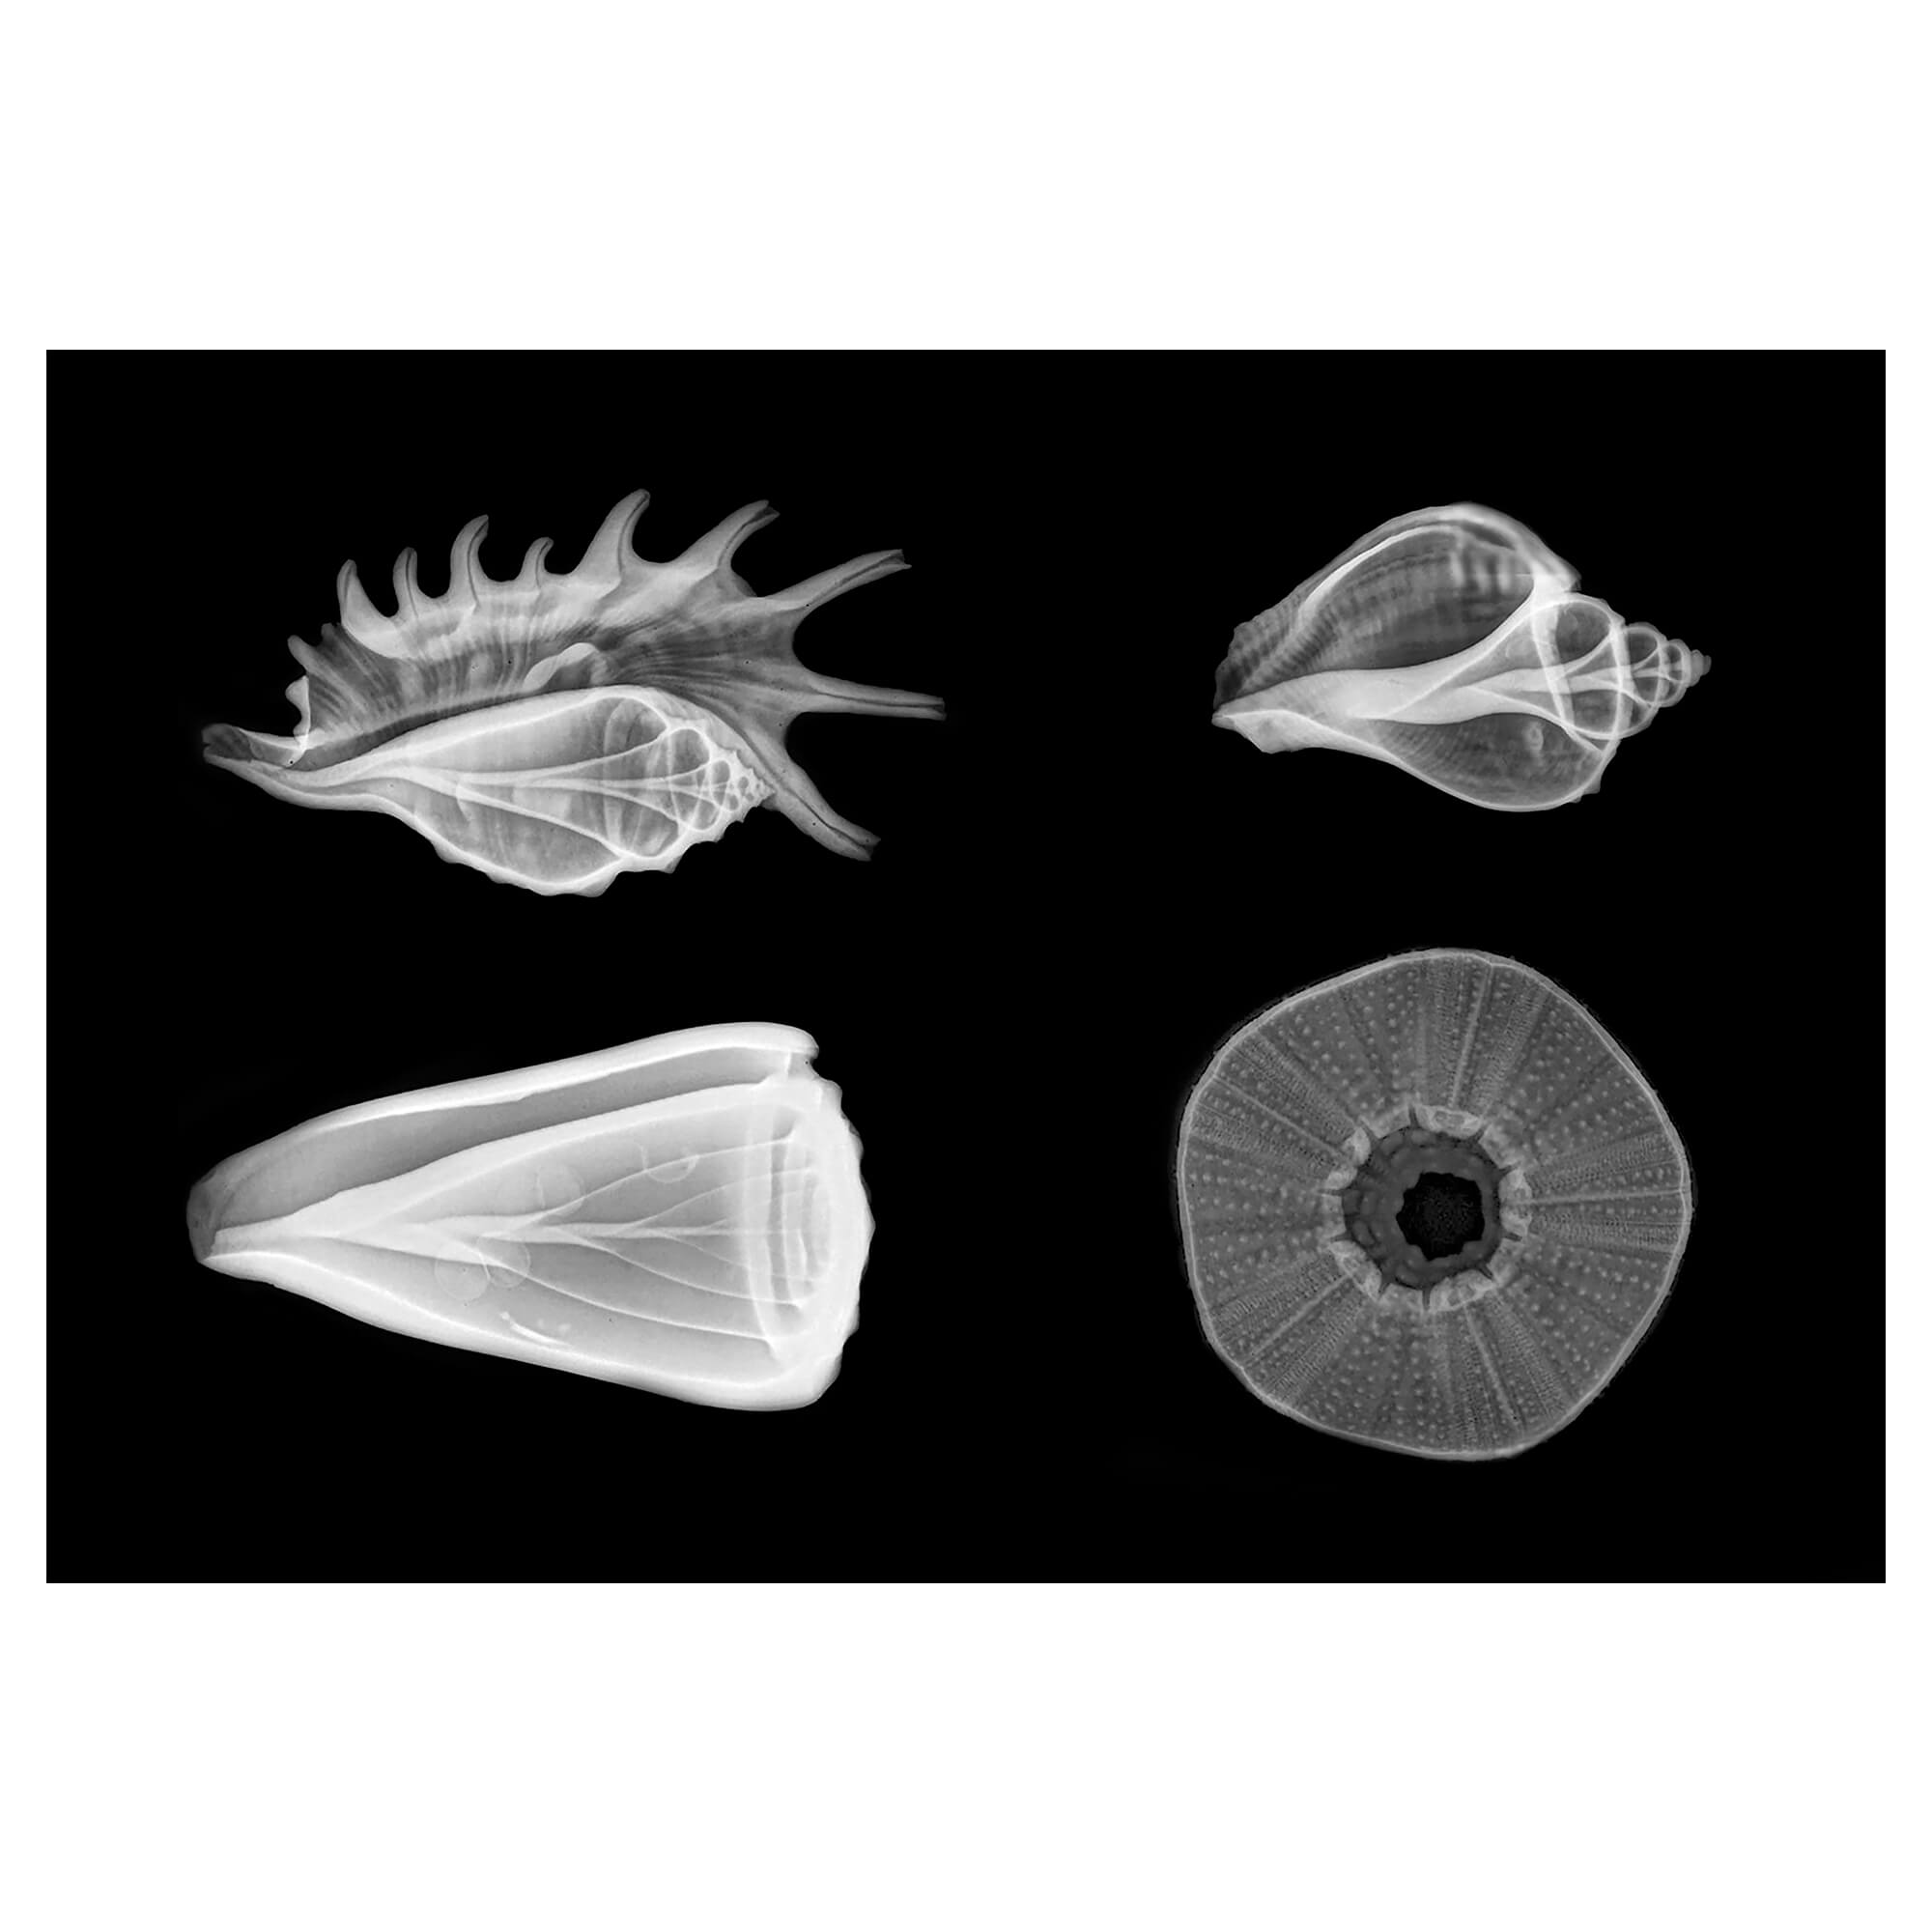 X-ray artwork featuring a captivating collection of seashells and a sea urchin by Hawaii artist Michelle Smith'